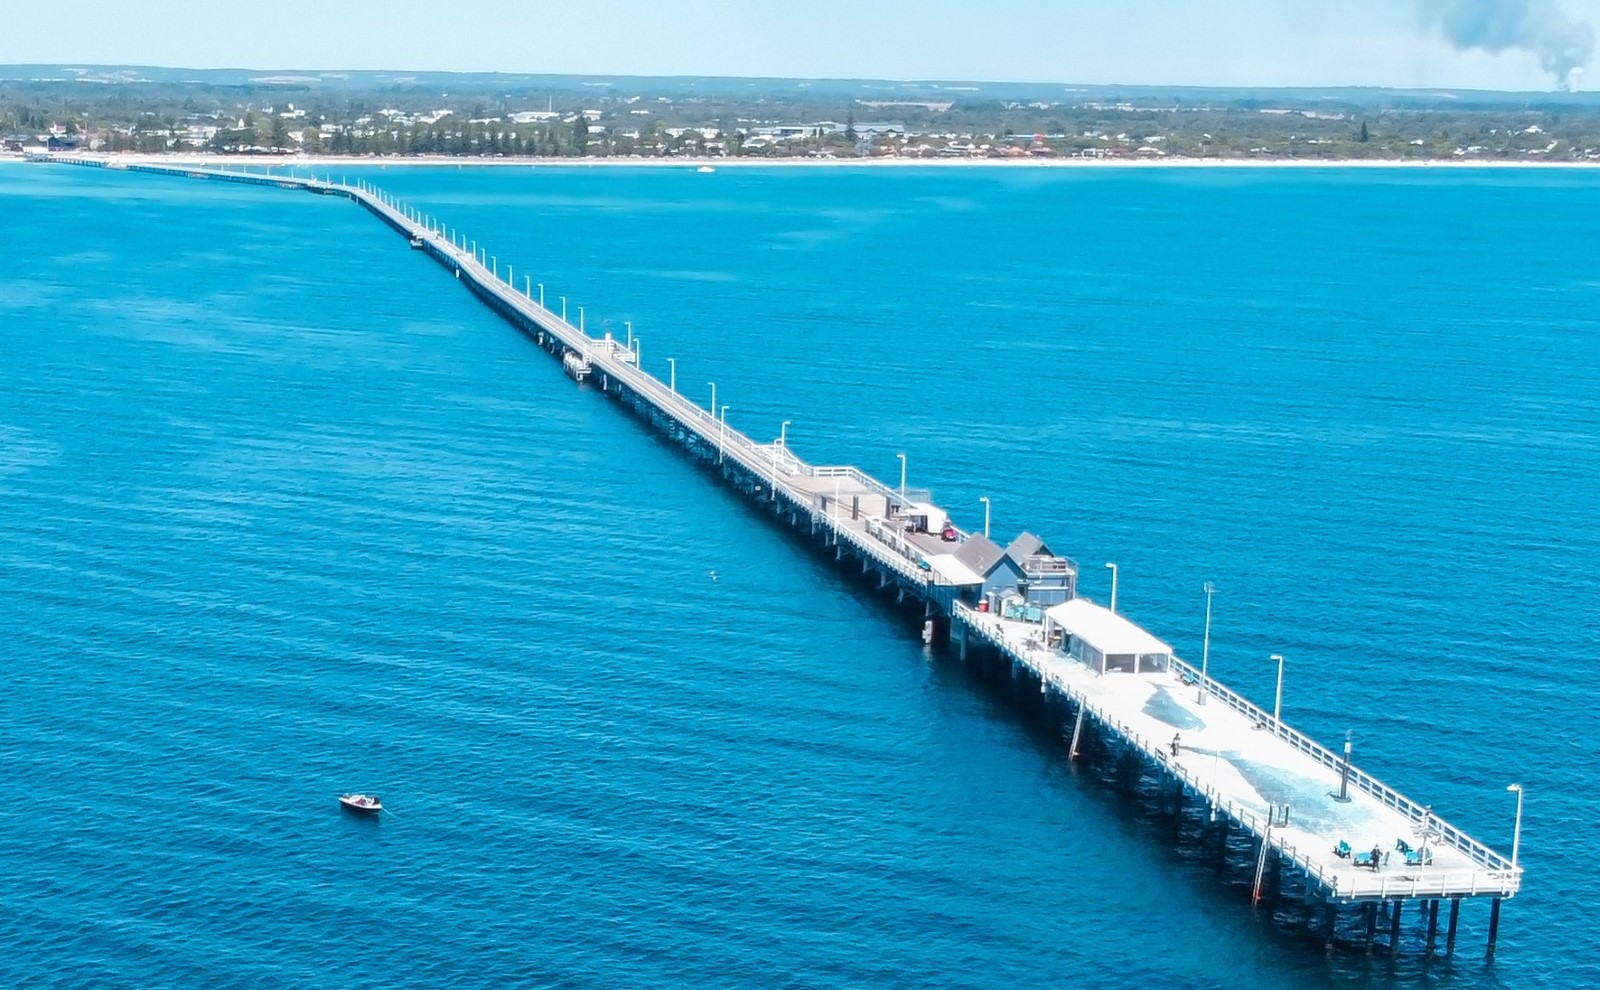 The iconic Busselton Jetty stretches into the turquoise waters of the Indian Ocean, a landmark pier known as the longest wooden jetty in the world, located in the coastal town of Busselton, Western Australia.